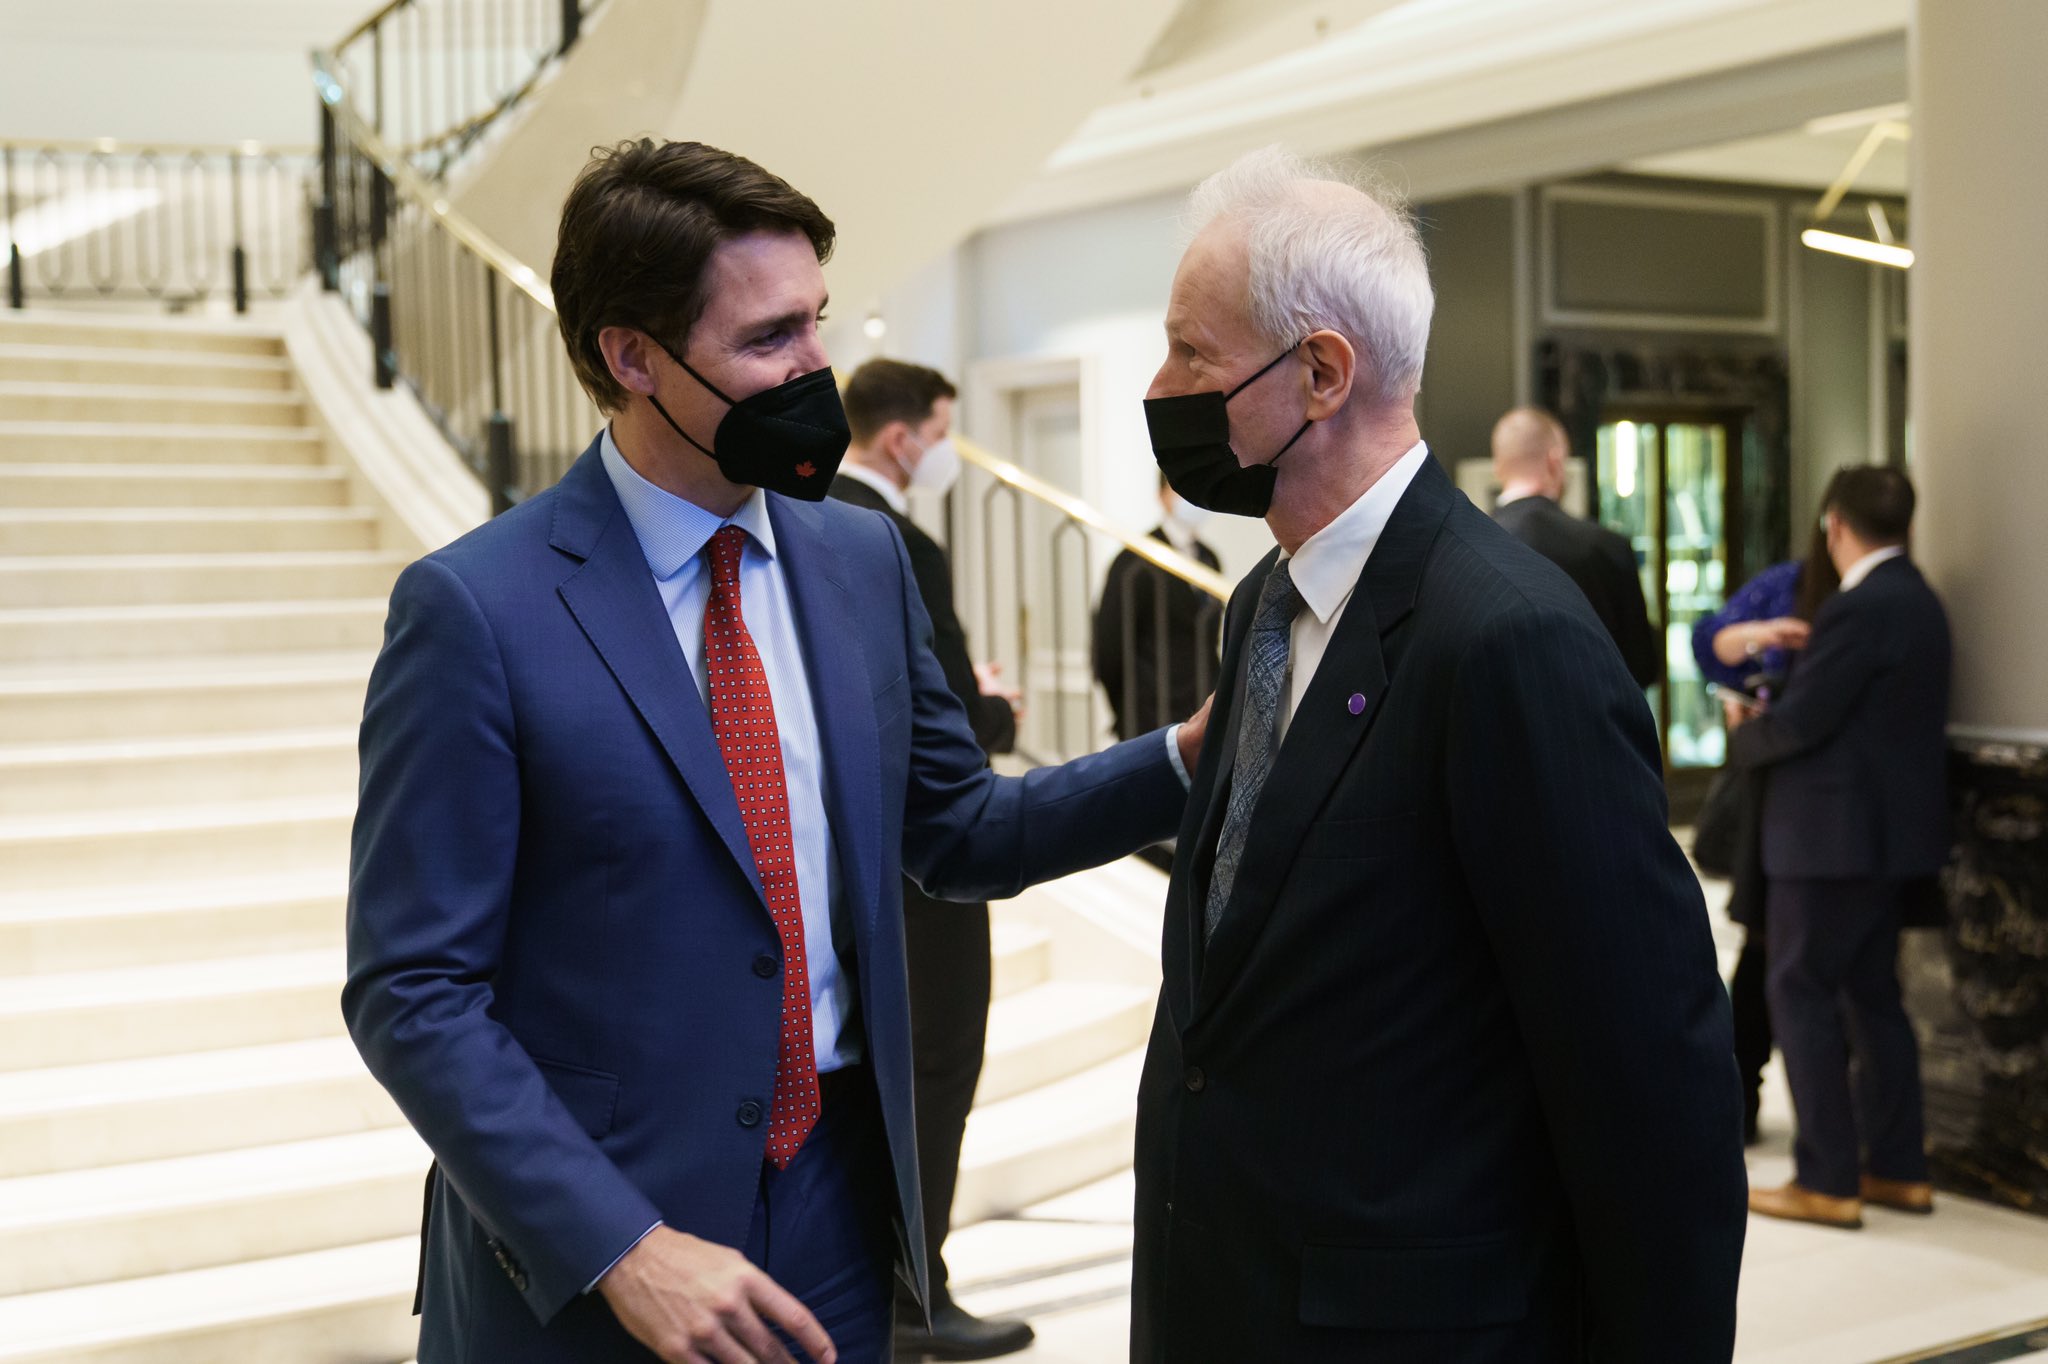 Prime Minister announces appointment of the Honourable Stéphane Dion as Canada’s Ambassador to France